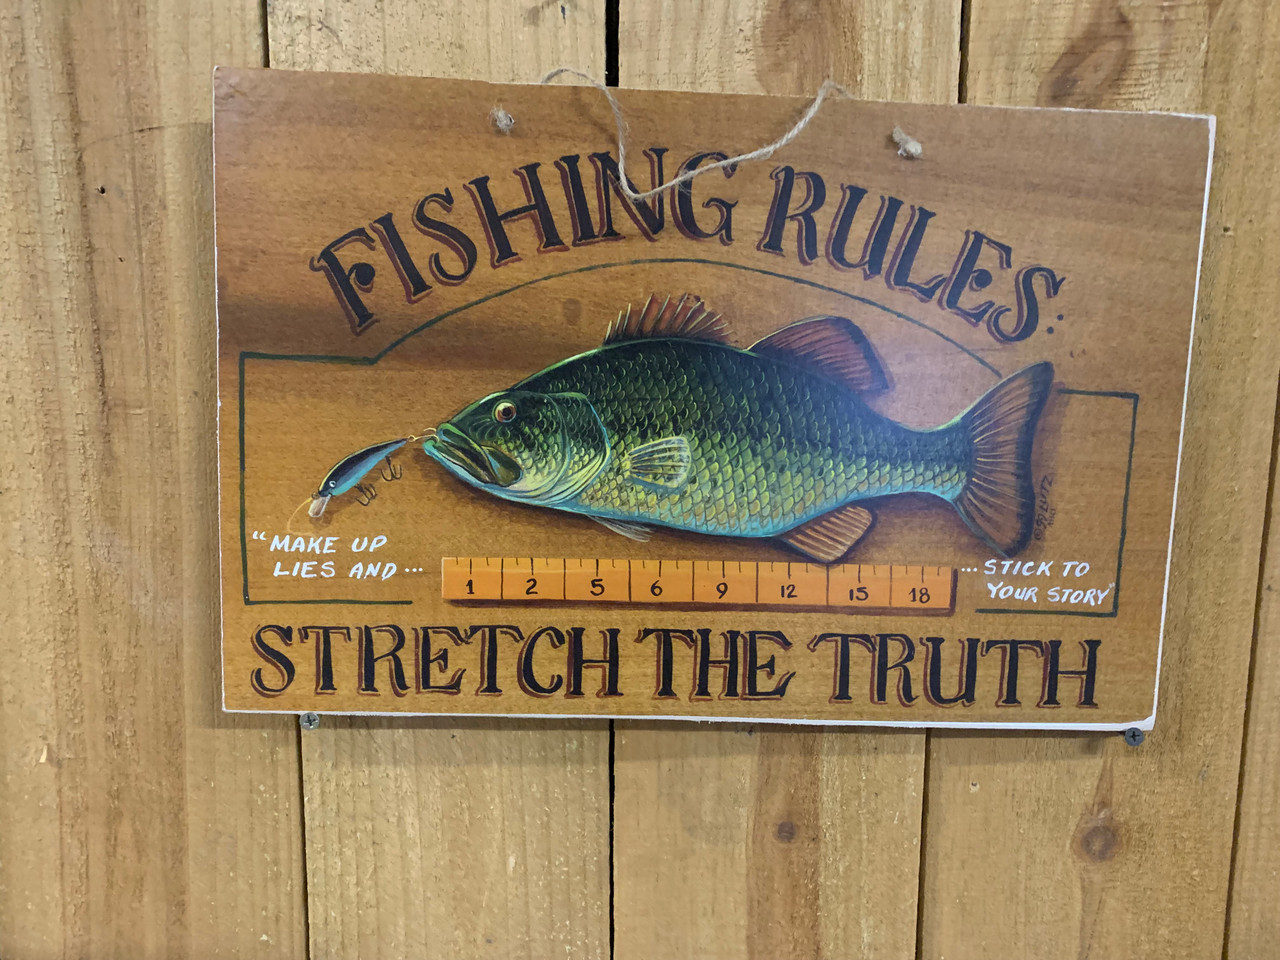 FISHING RULES: STRETCH THE TRUTH, MAKE UP LIES AND TICK TO YOUR